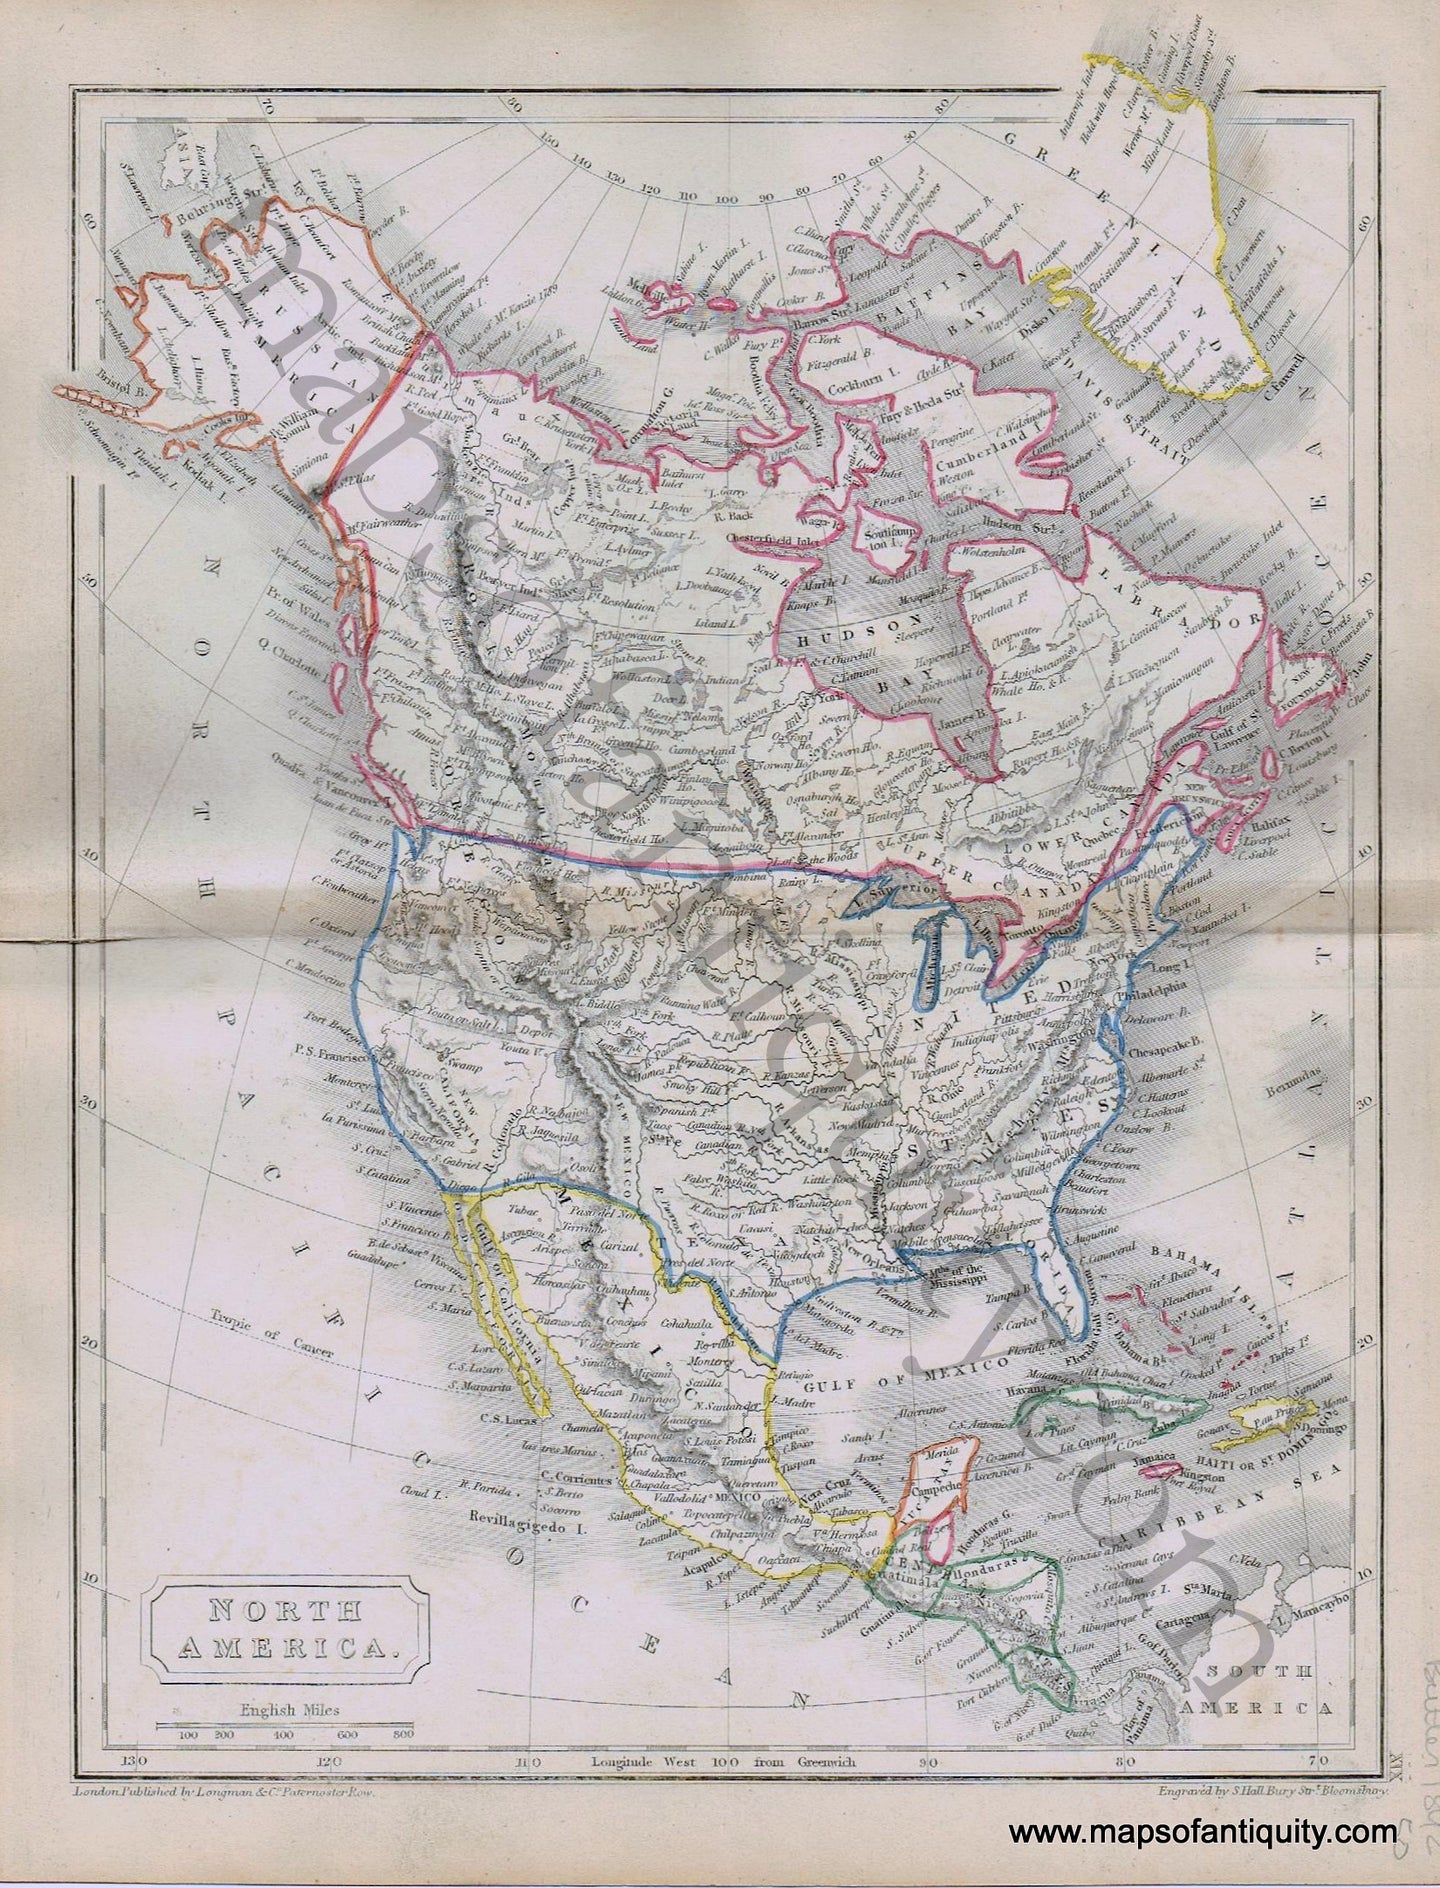 Antique-Hand-Colored-Map-North-America.-1842-Butler-1800s-19th-century-Maps-of-Antiquity